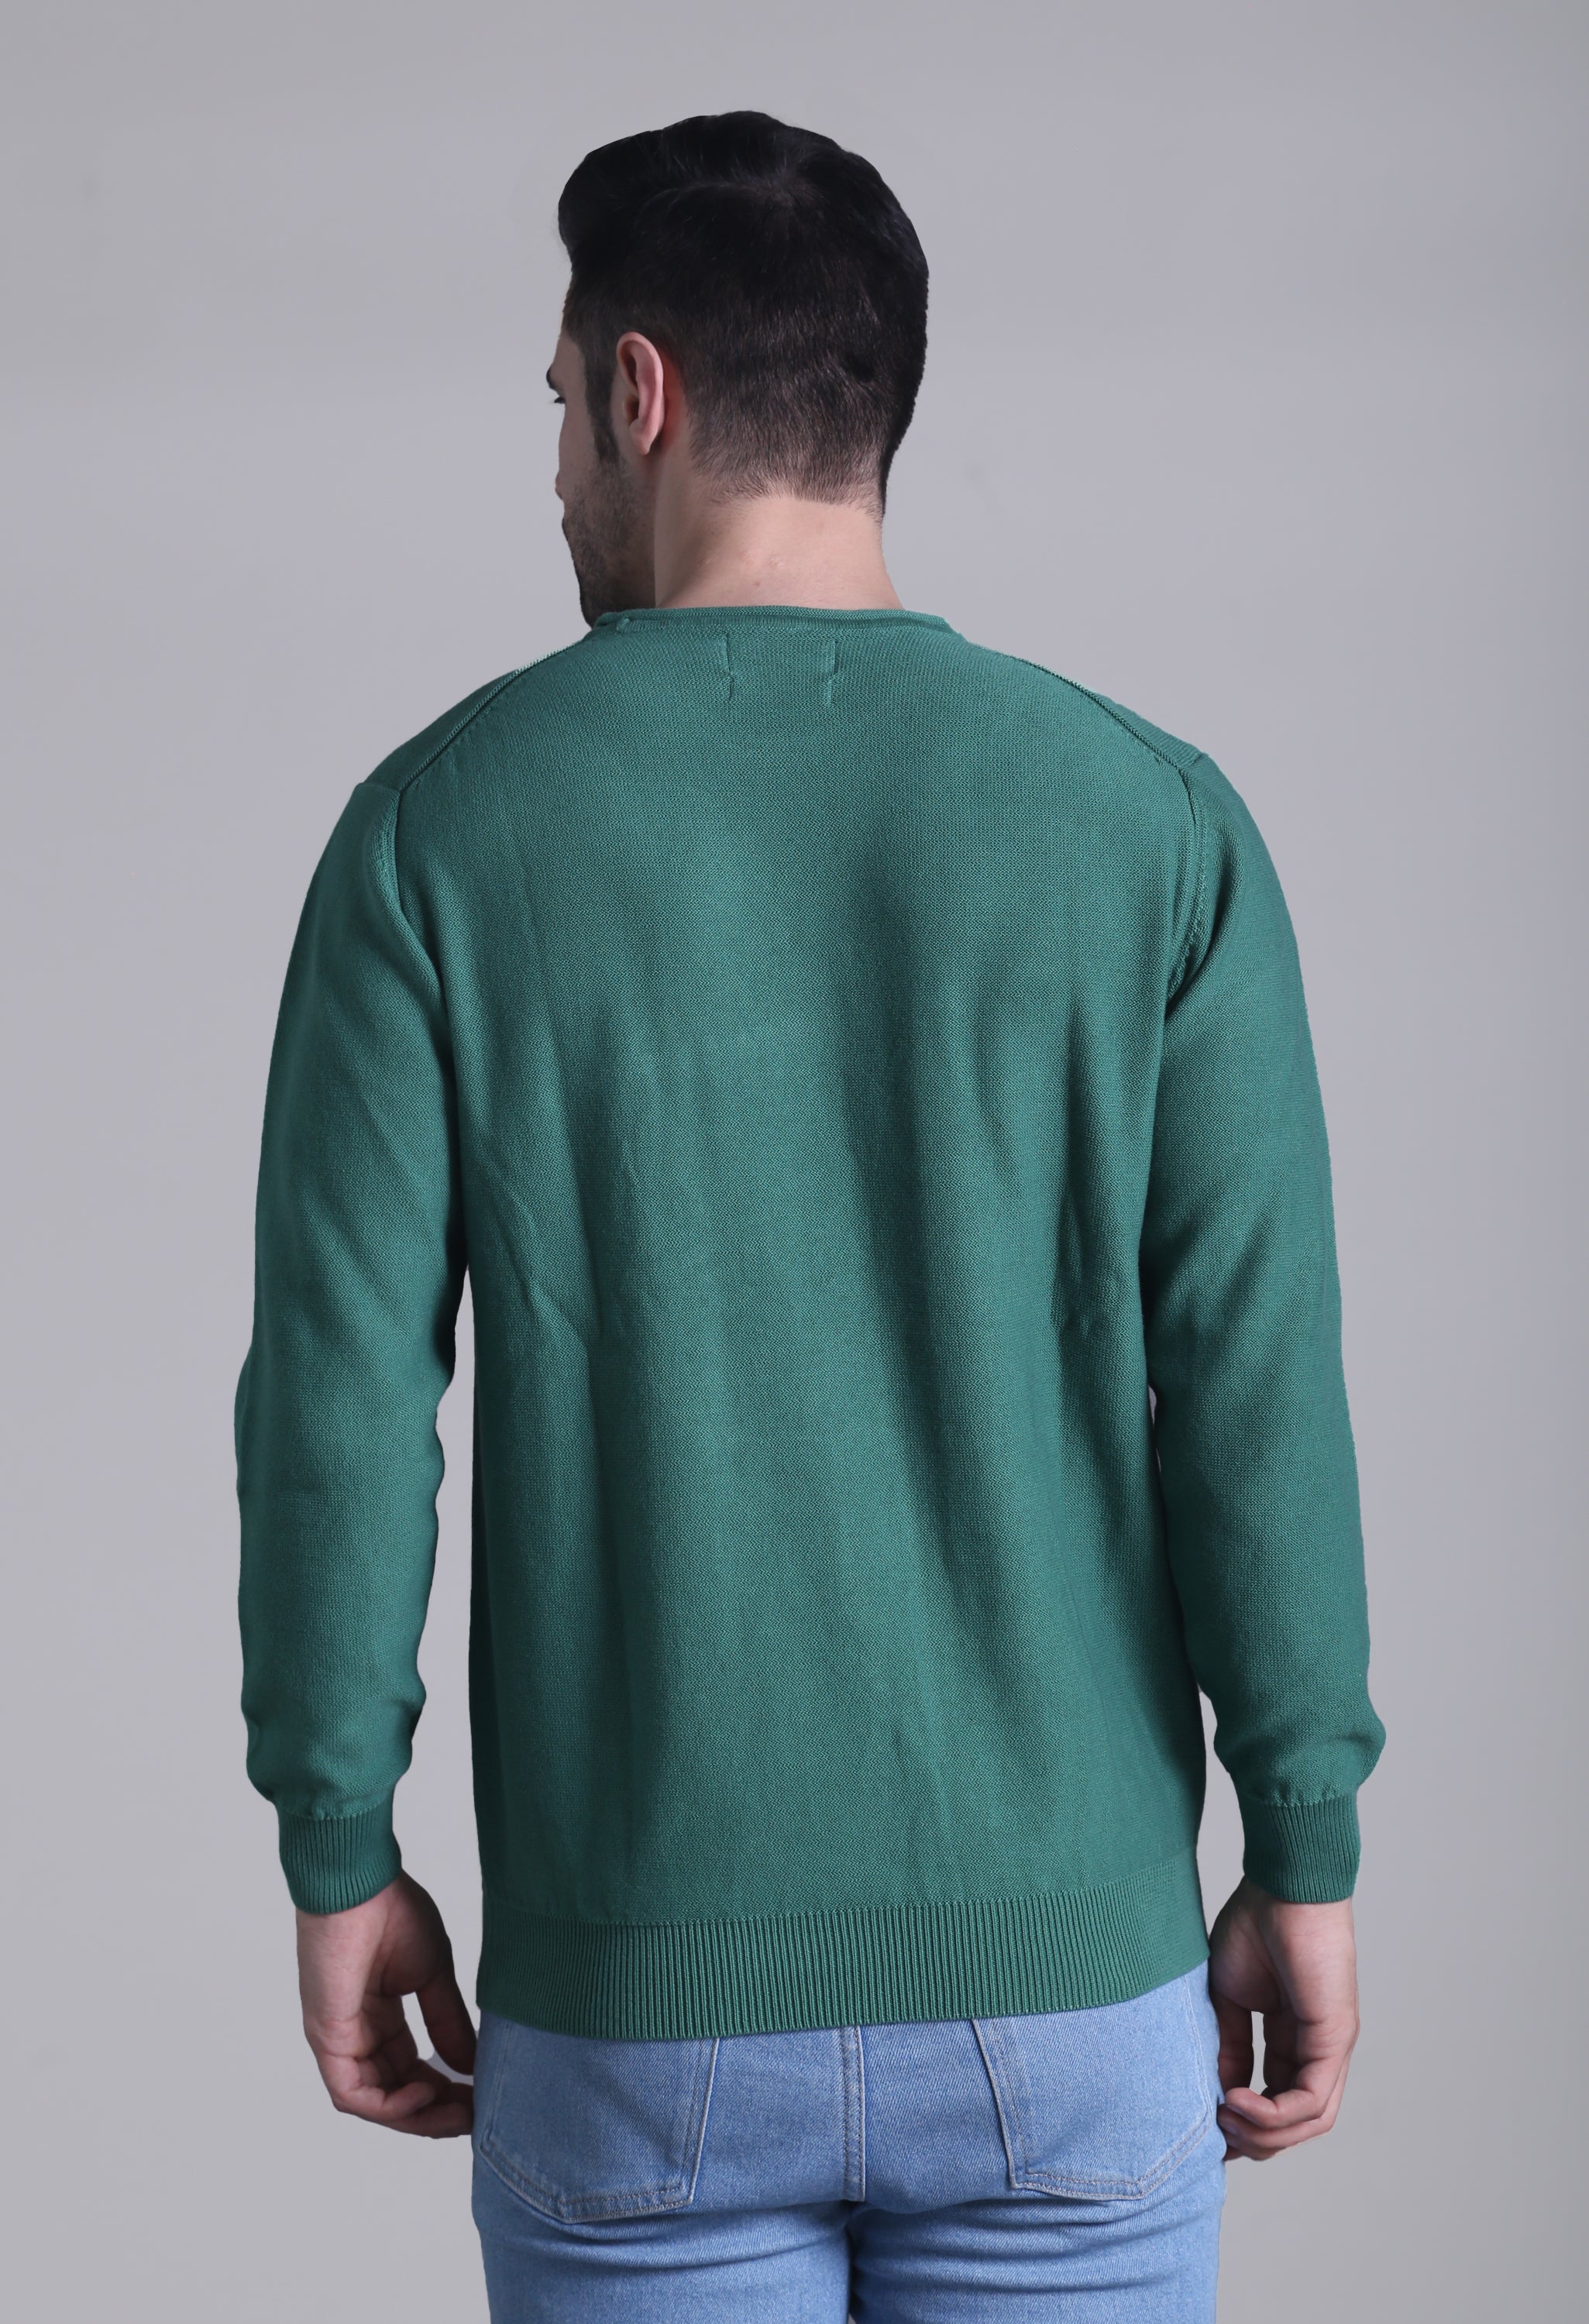 Solid Plane Green Sweater - SQUIREHOOD